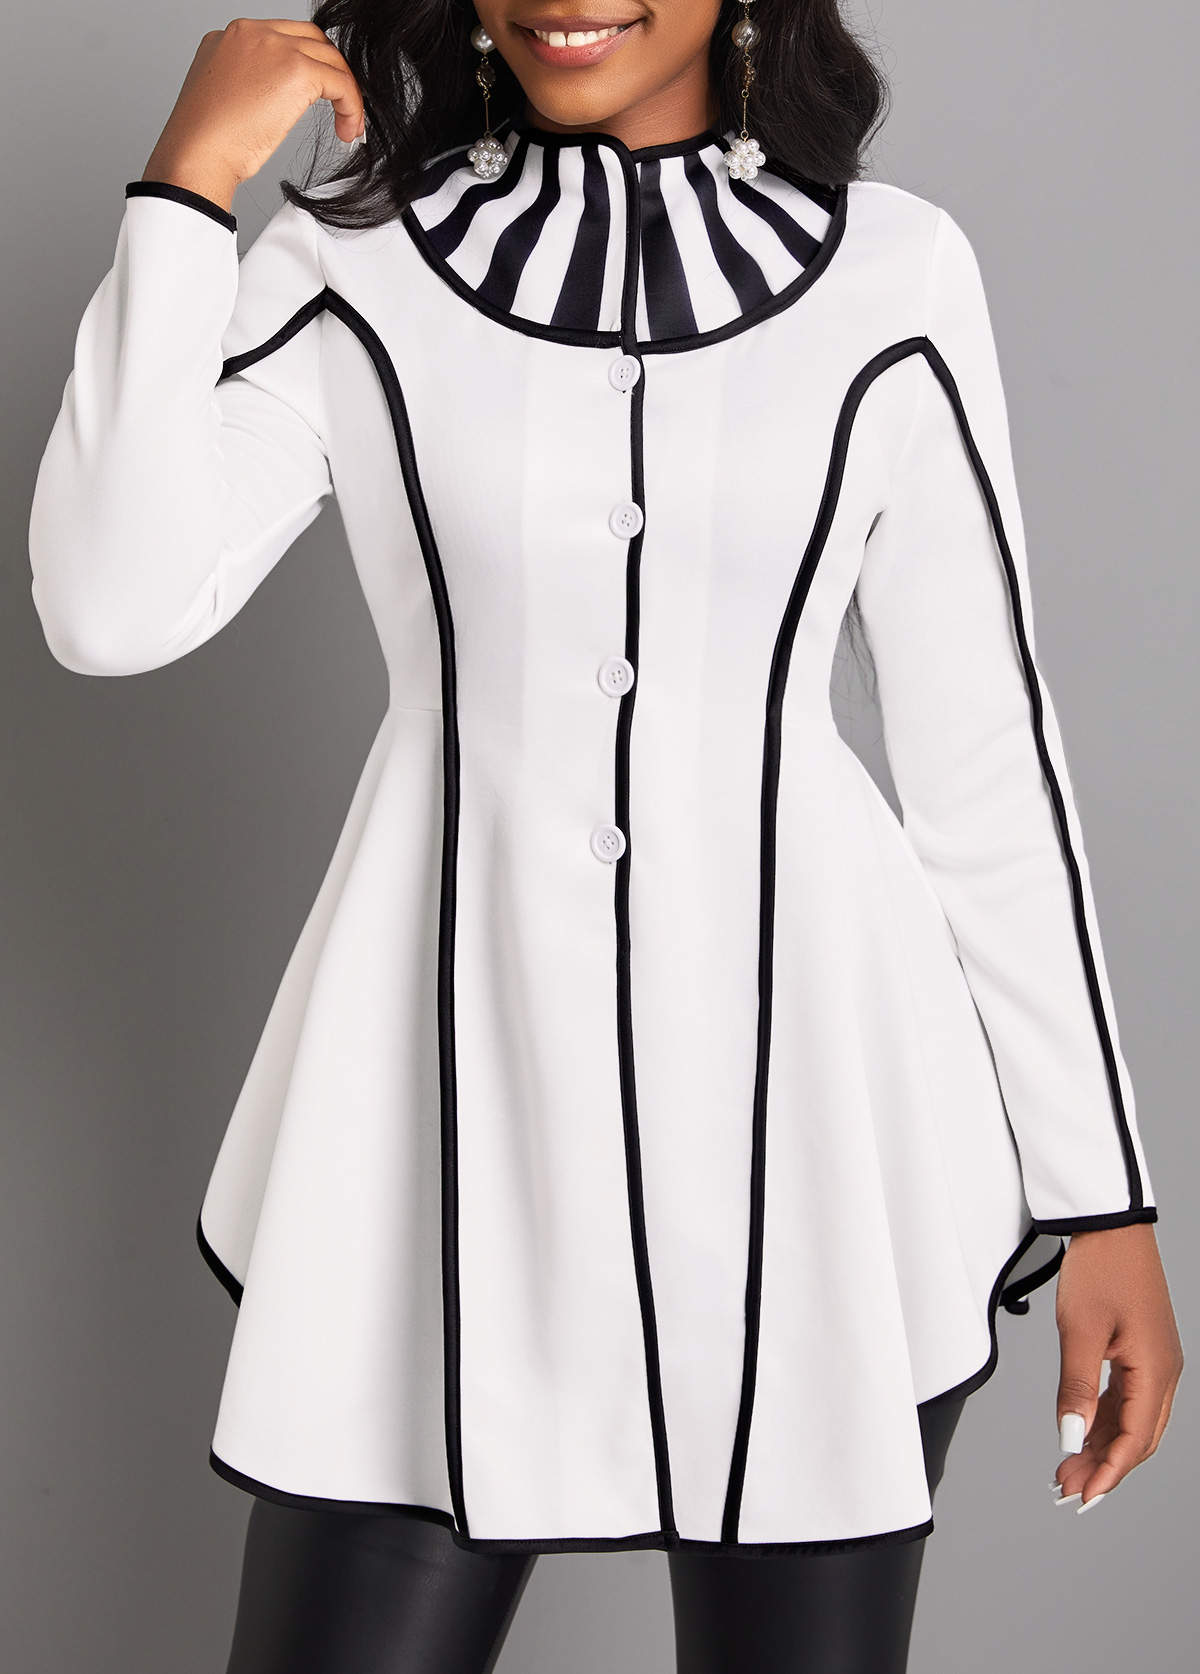 Striped Contrast Binding White Stand Collar Coat